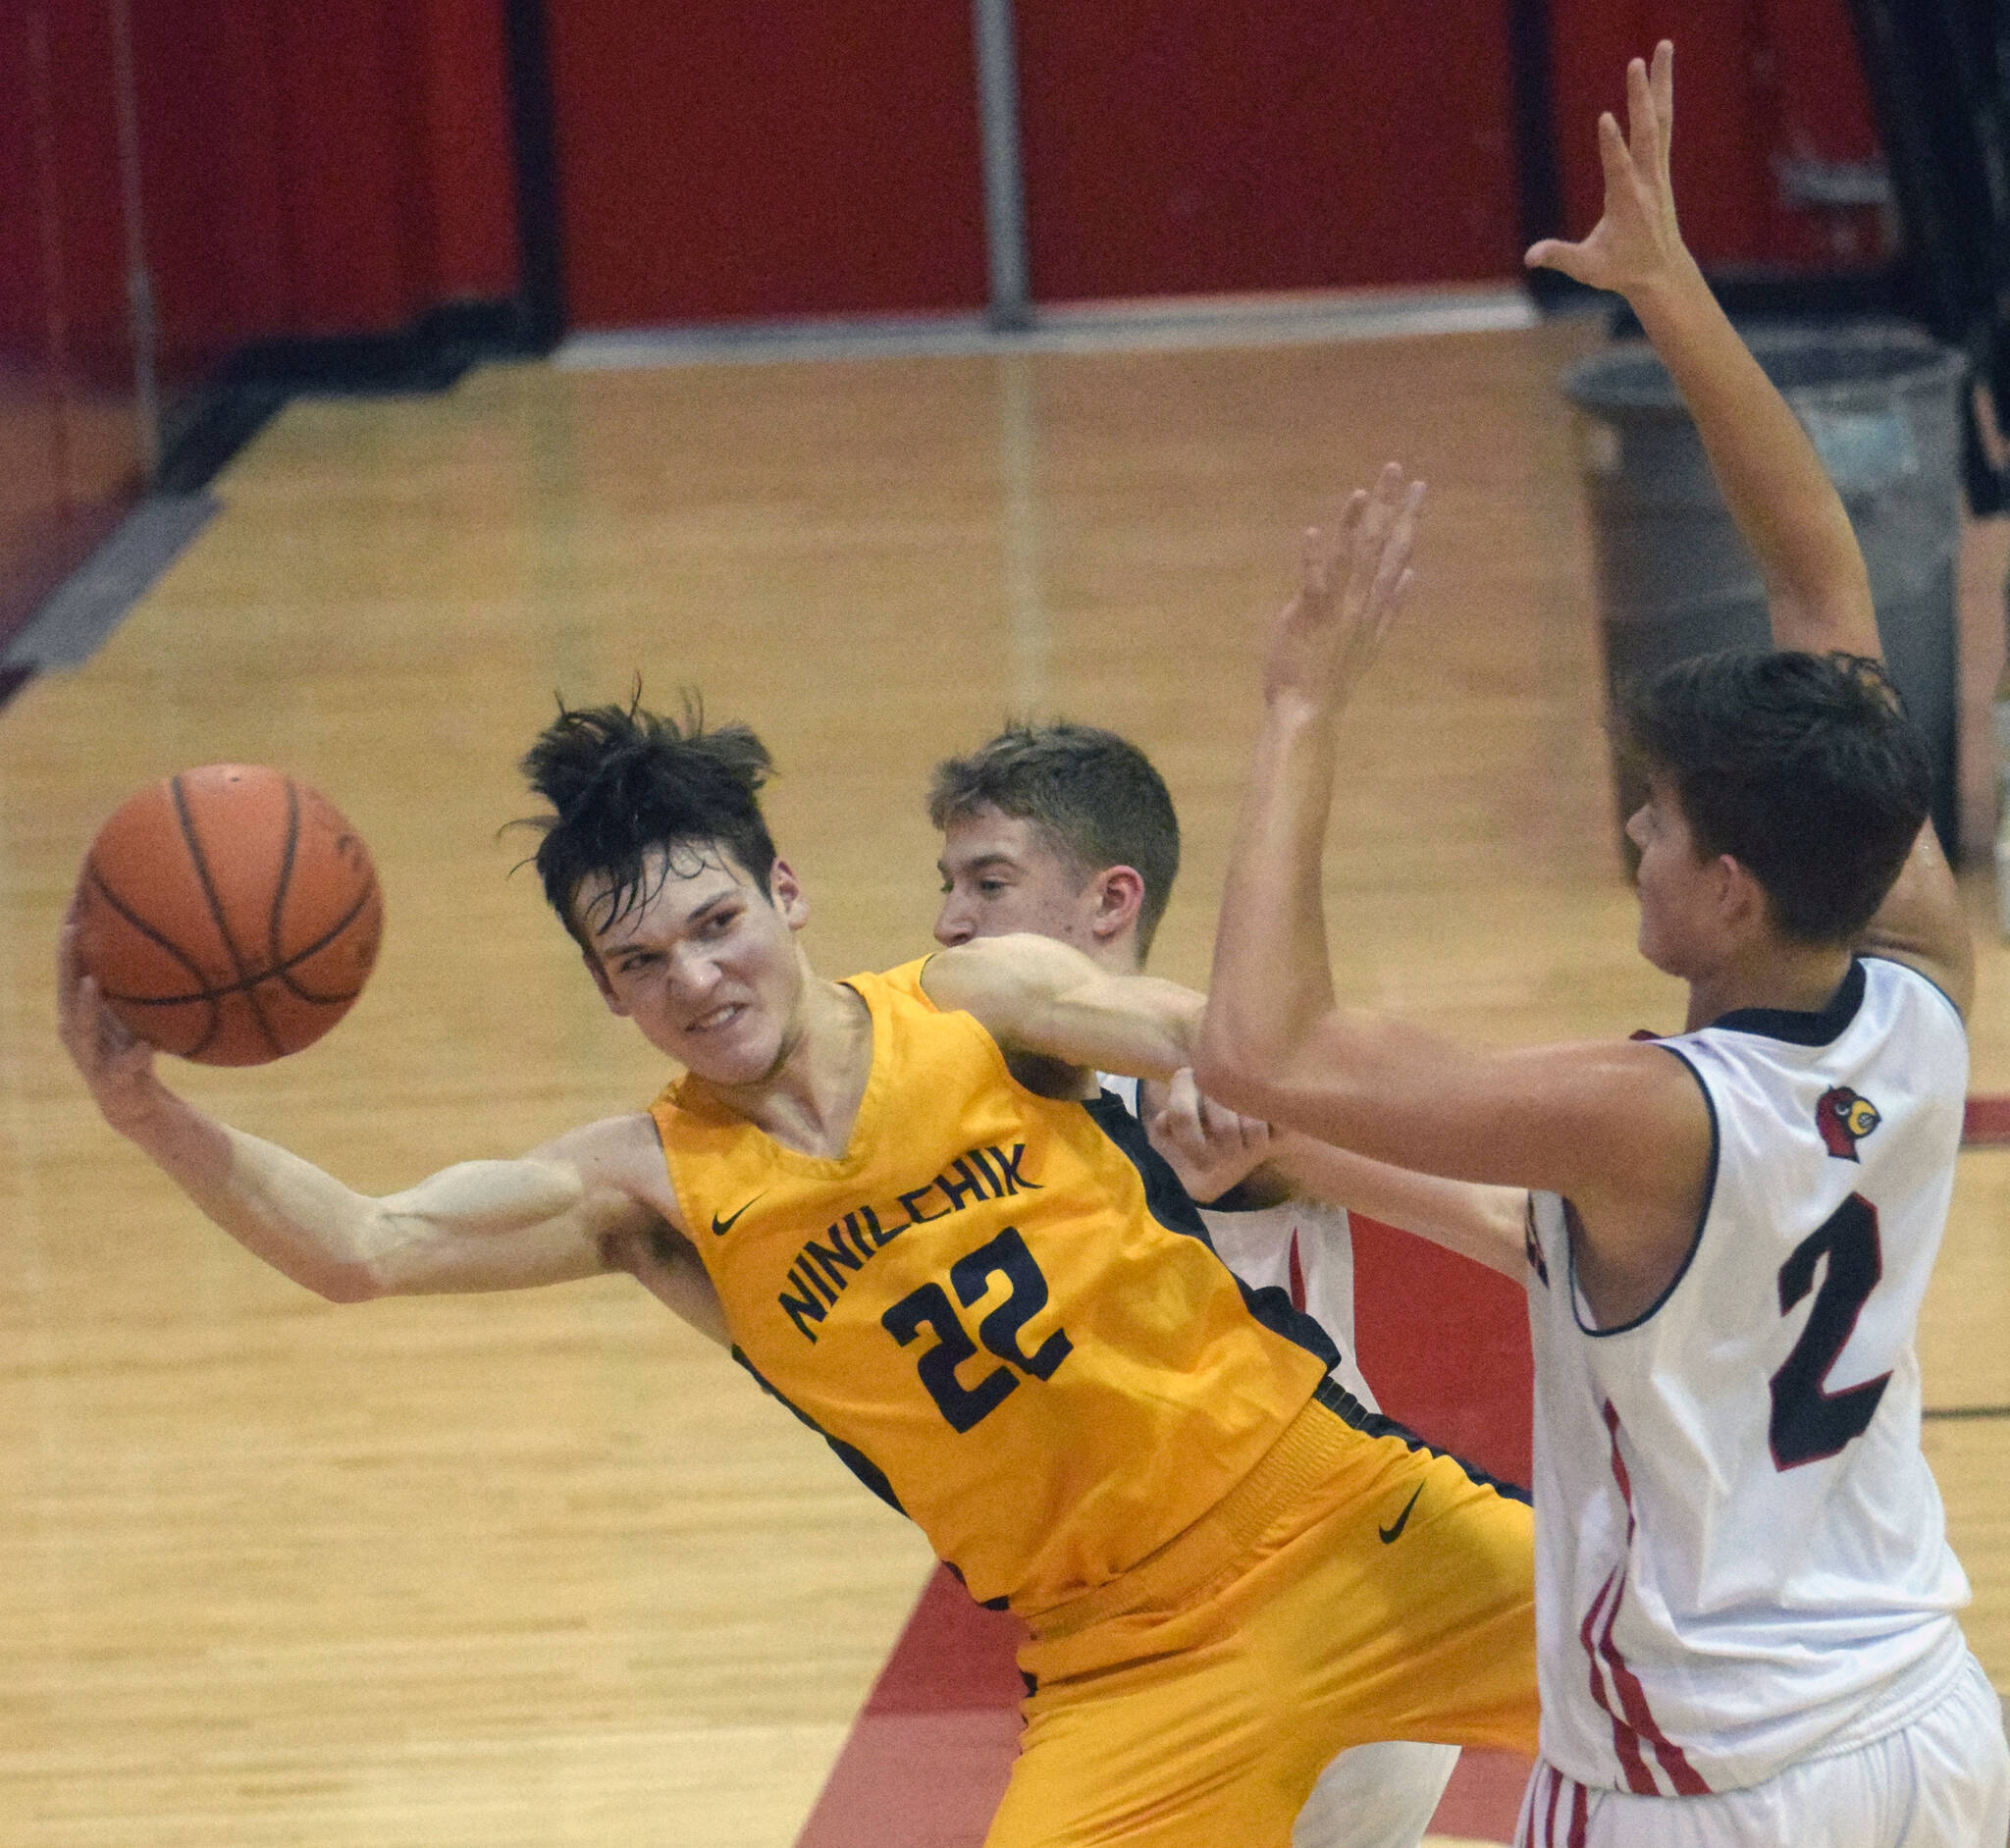 Ninilchik’s Justin Trail saves the ball in front of Kenai Central’s Luke Armstrong and Eli McCubbins on Saturday, March 5, 2022, at Kenai Central High School in Kenai, Alaska. (Photo by Jeff Helminiak/Peninsula Clarion)